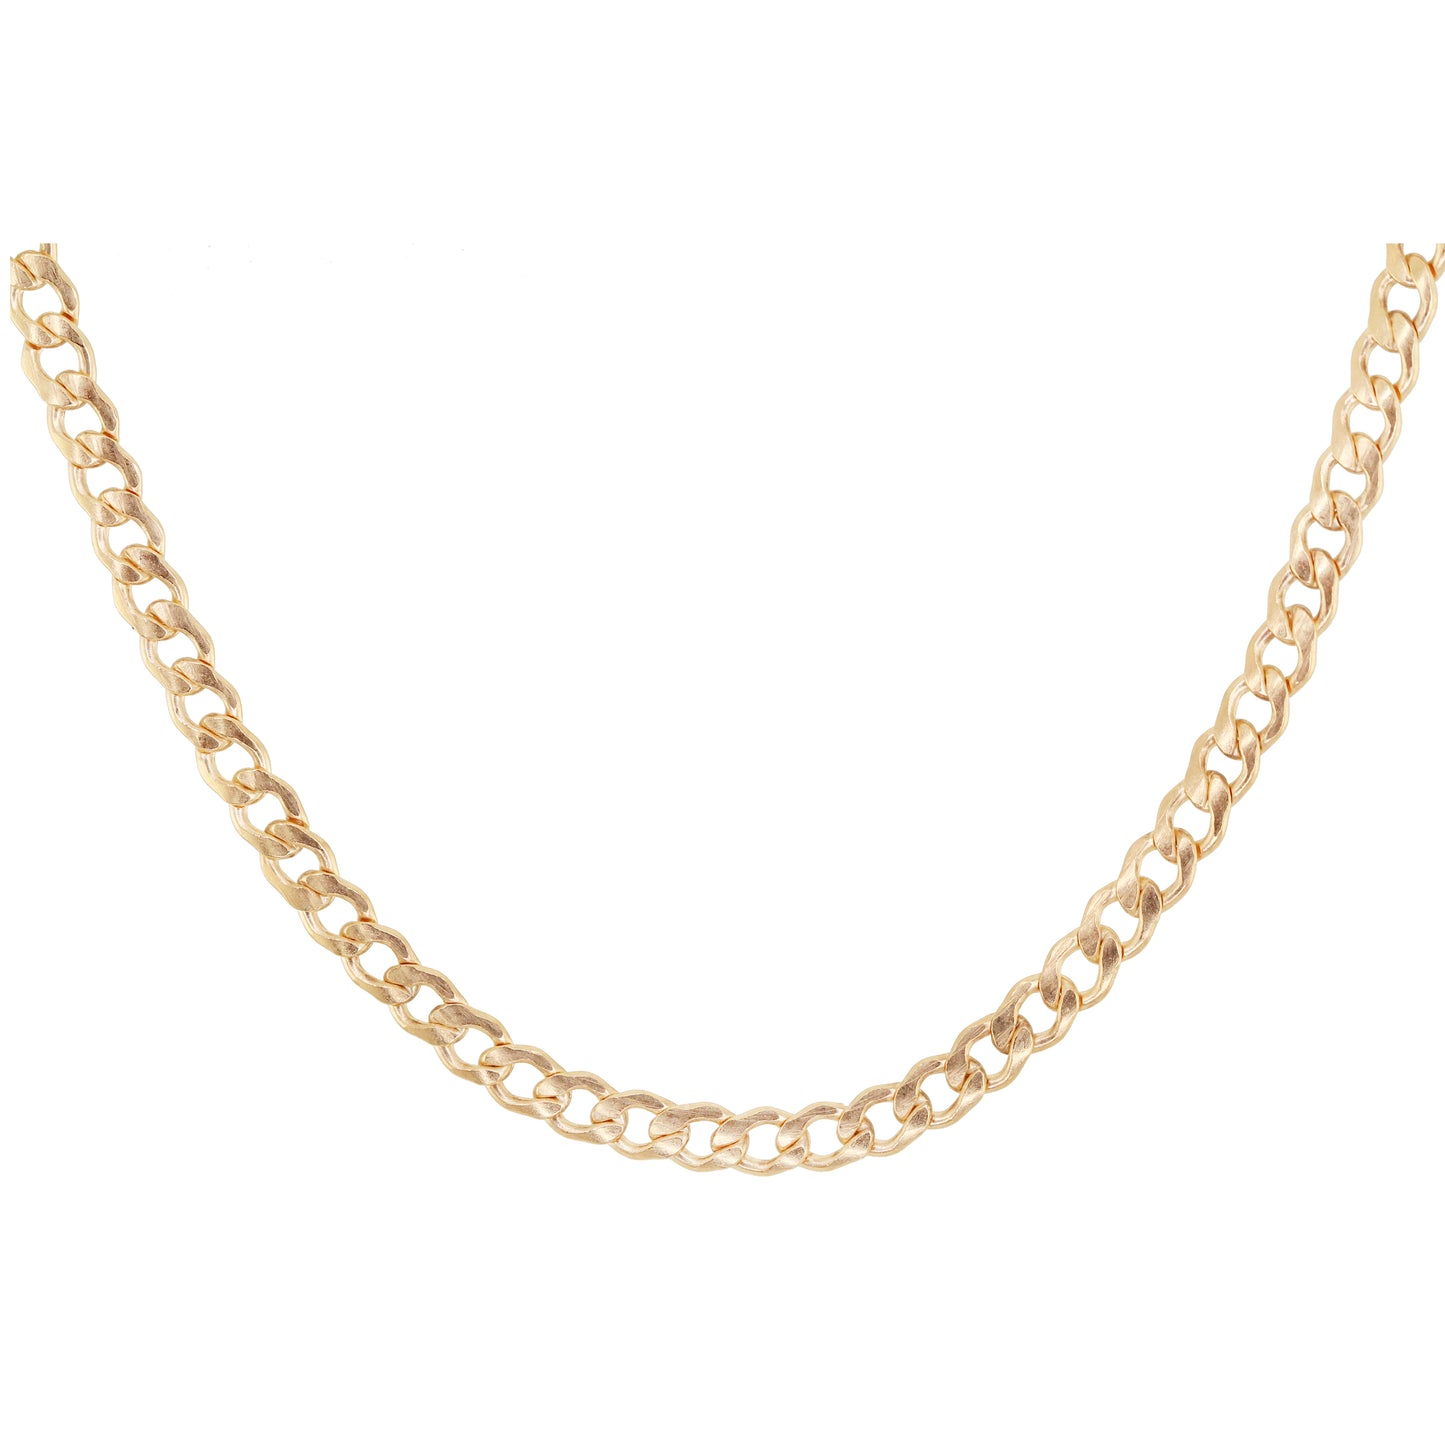 14kt gold mini curbed link chain necklace